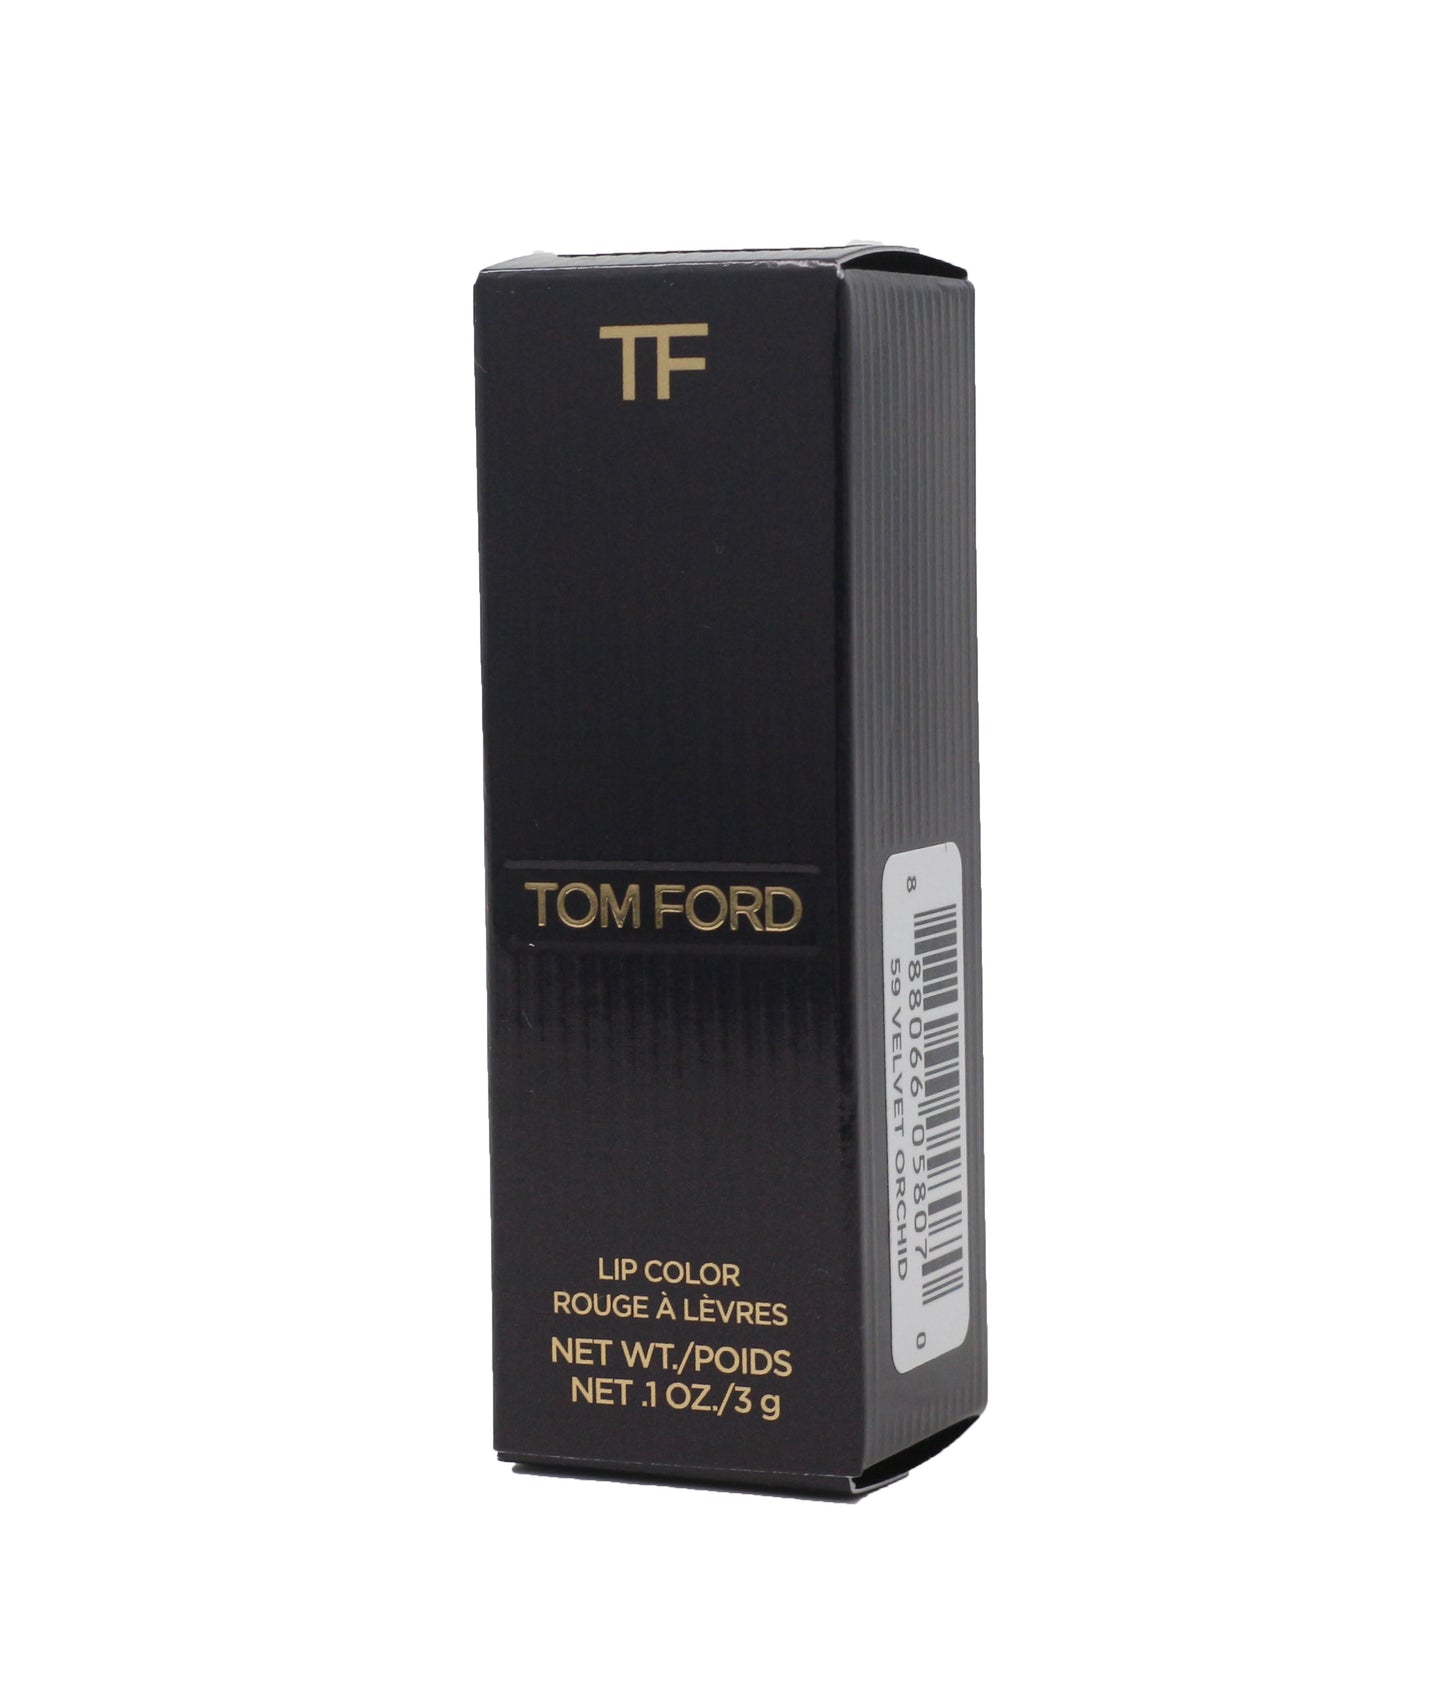 Tom Ford Lip Color Rouge A Levres 0.1oz/3ml 59 Velvet Orchid New In Box